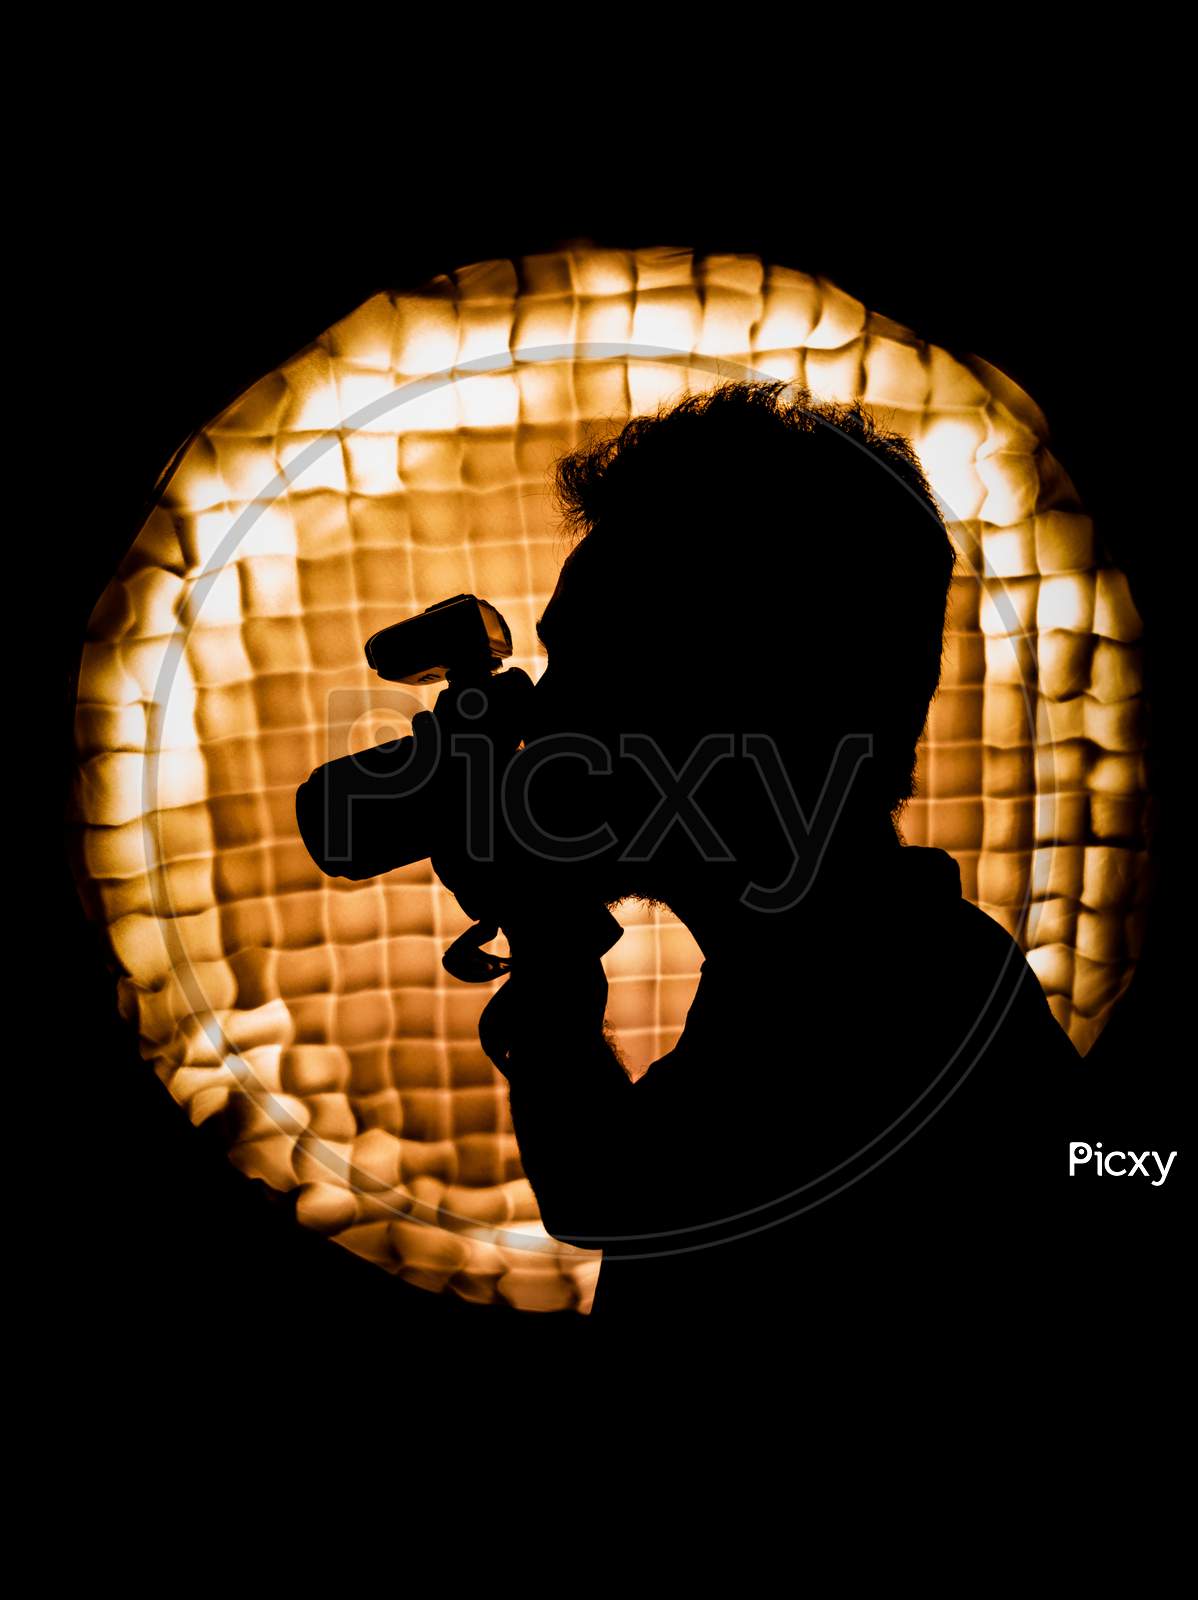 Low light picture of a photographer